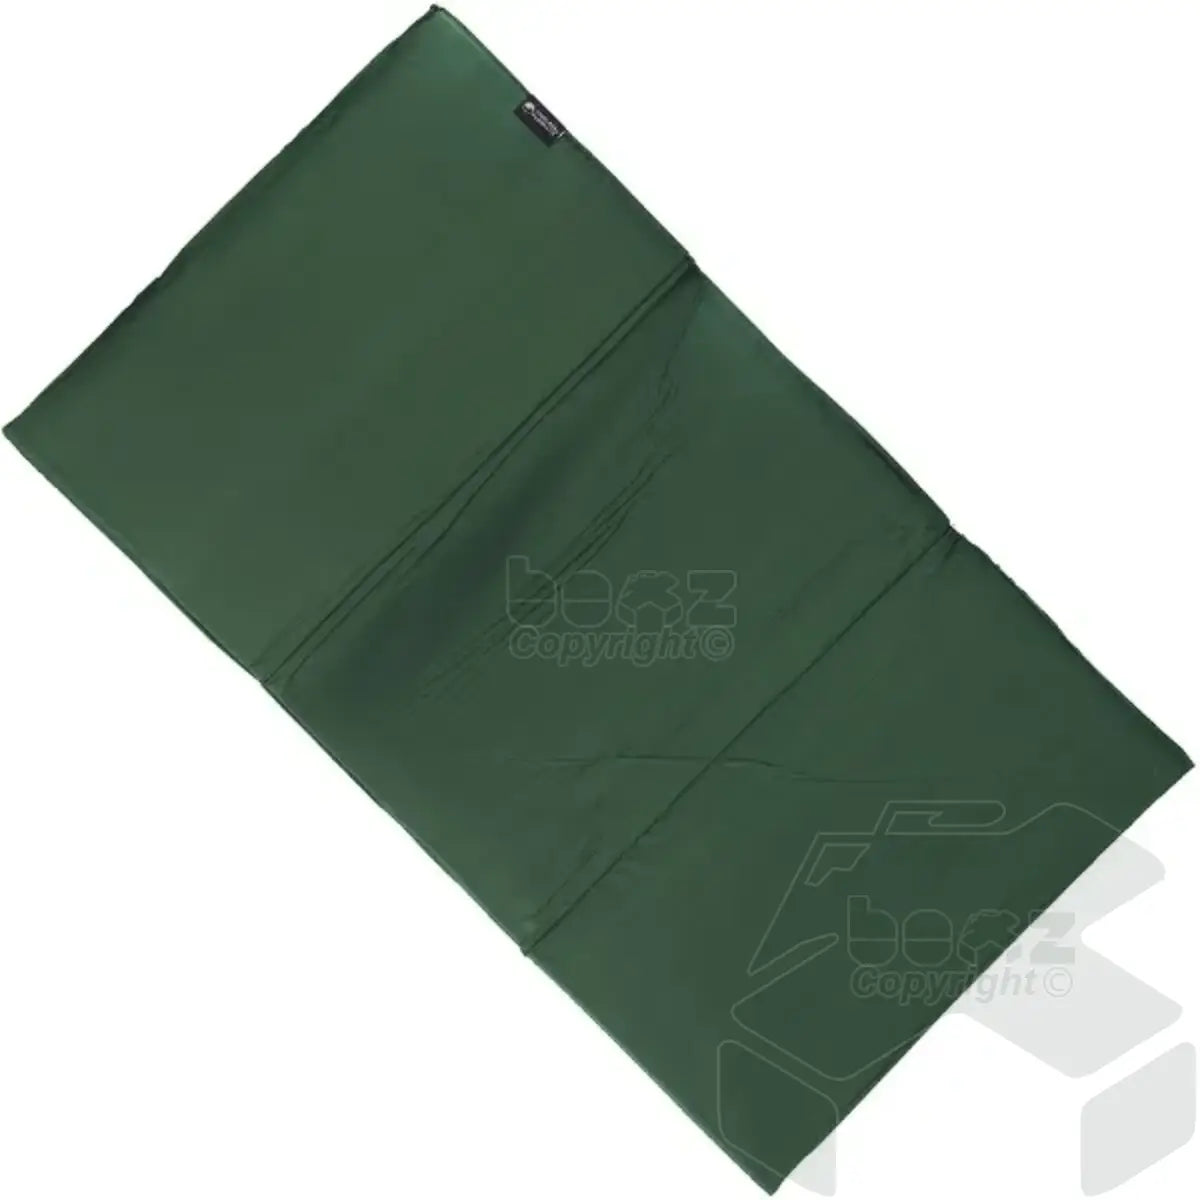 Angling Pursuits Eco Mat - Quick Folding with Elastic